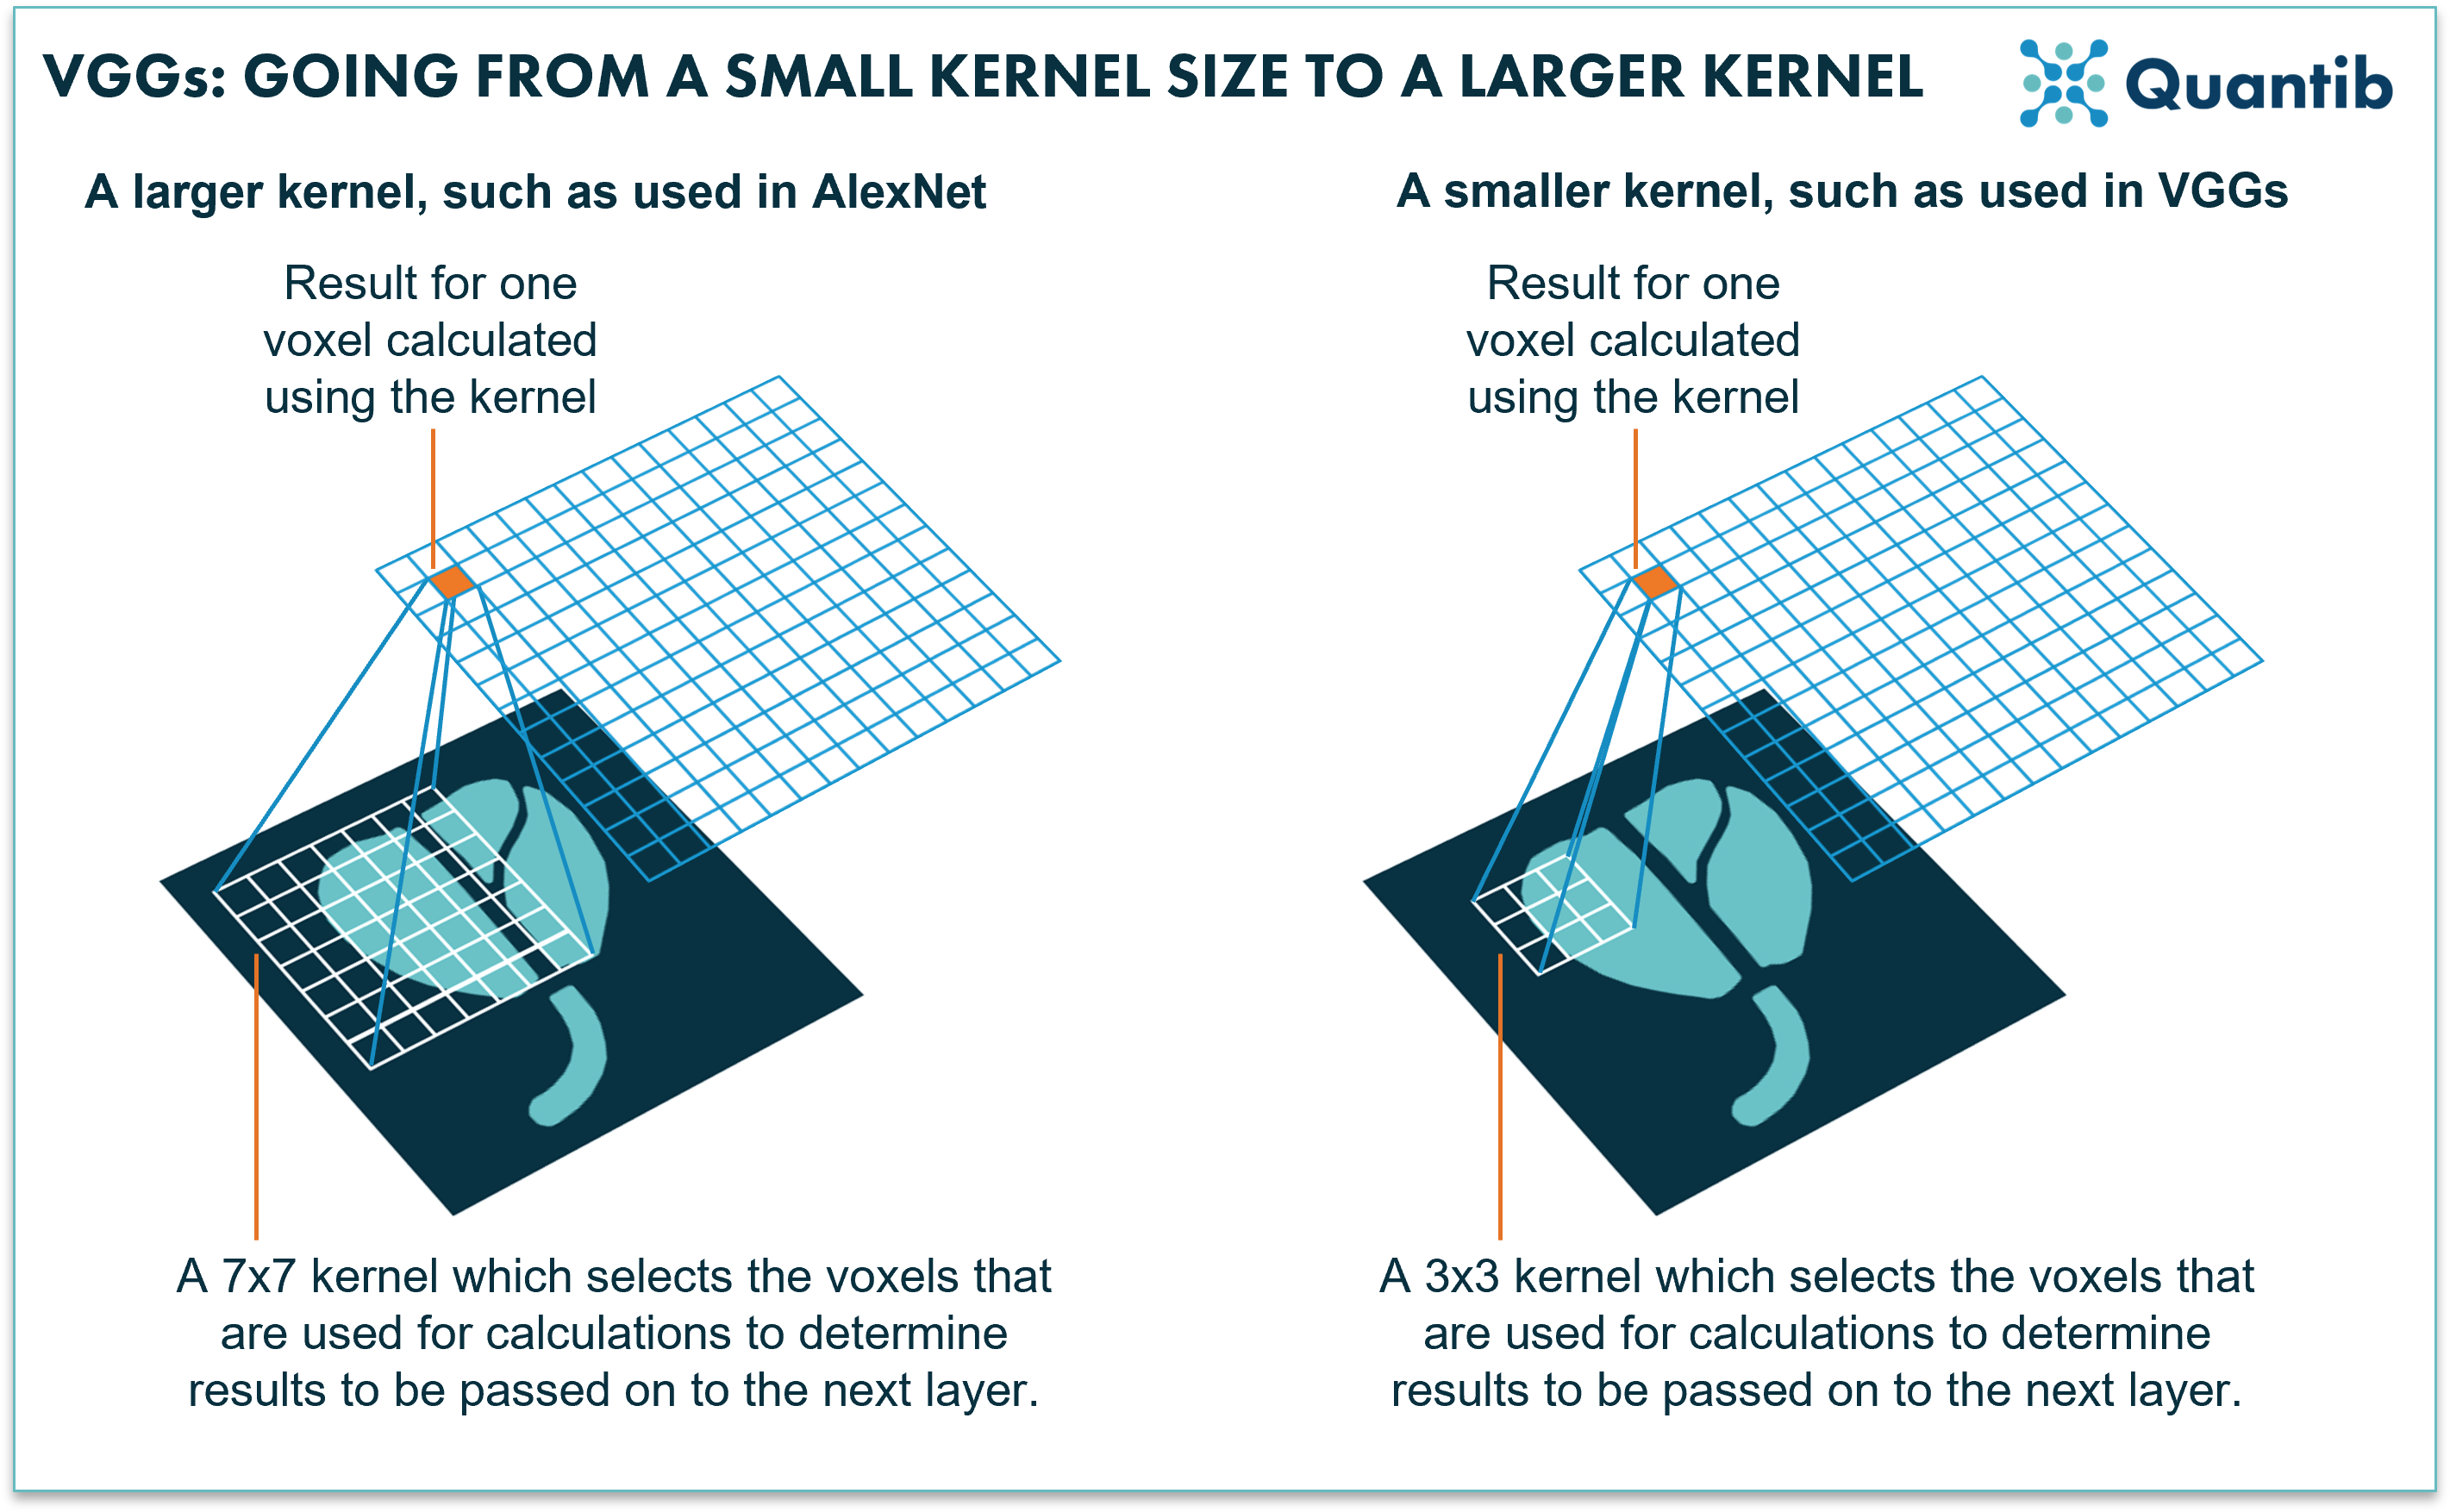 VGGs: going from a small kernel size to a larger kernel